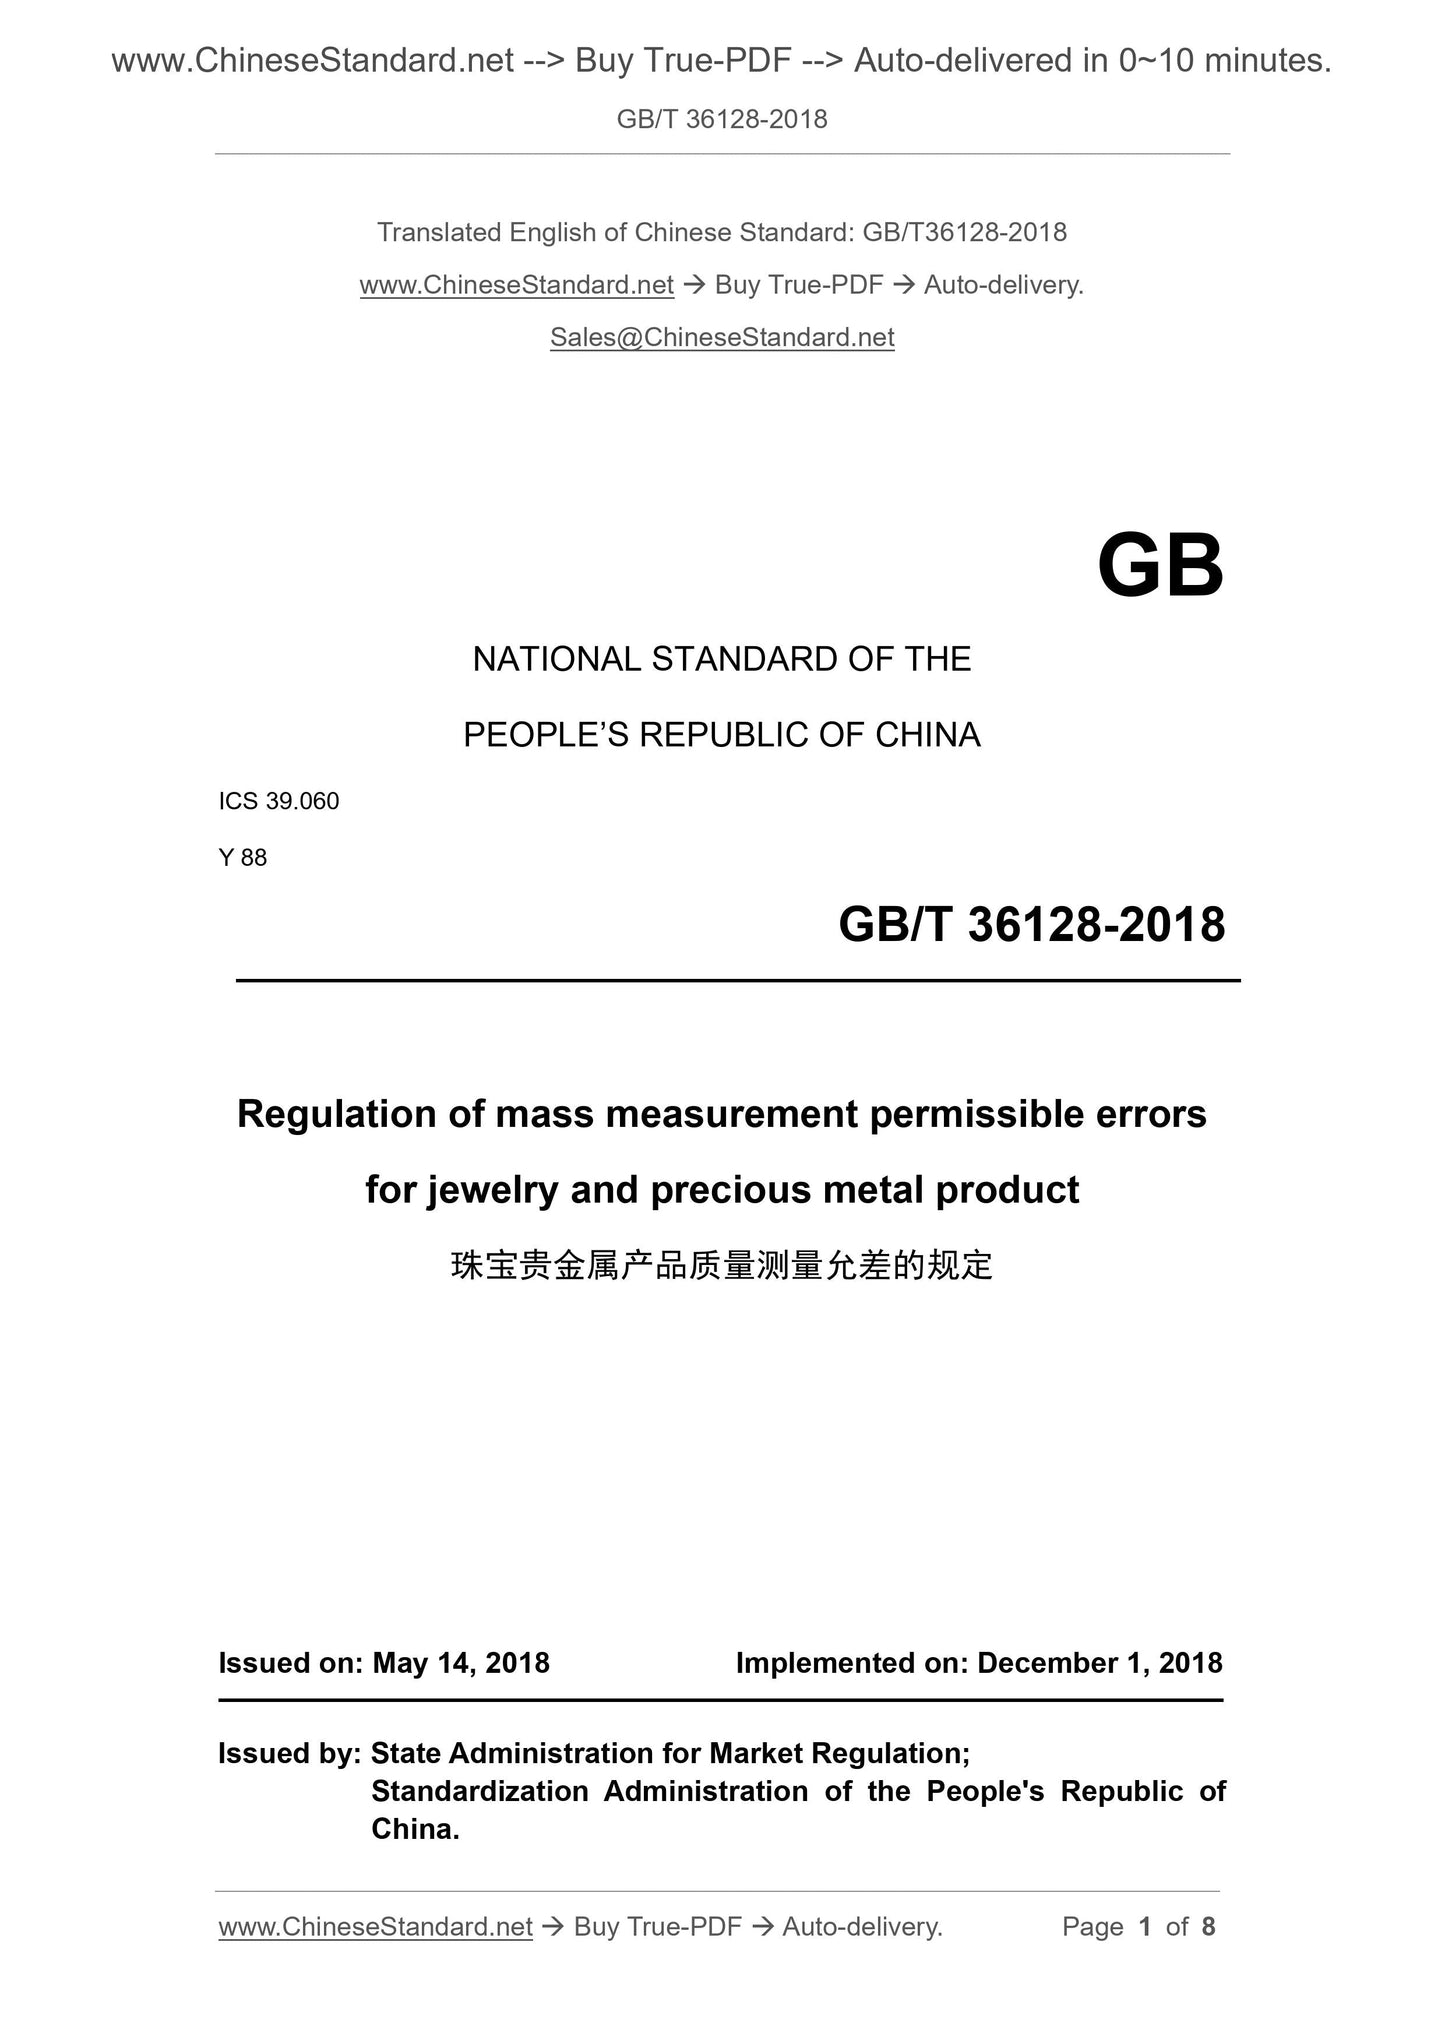 GB/T 36128-2018 Page 1